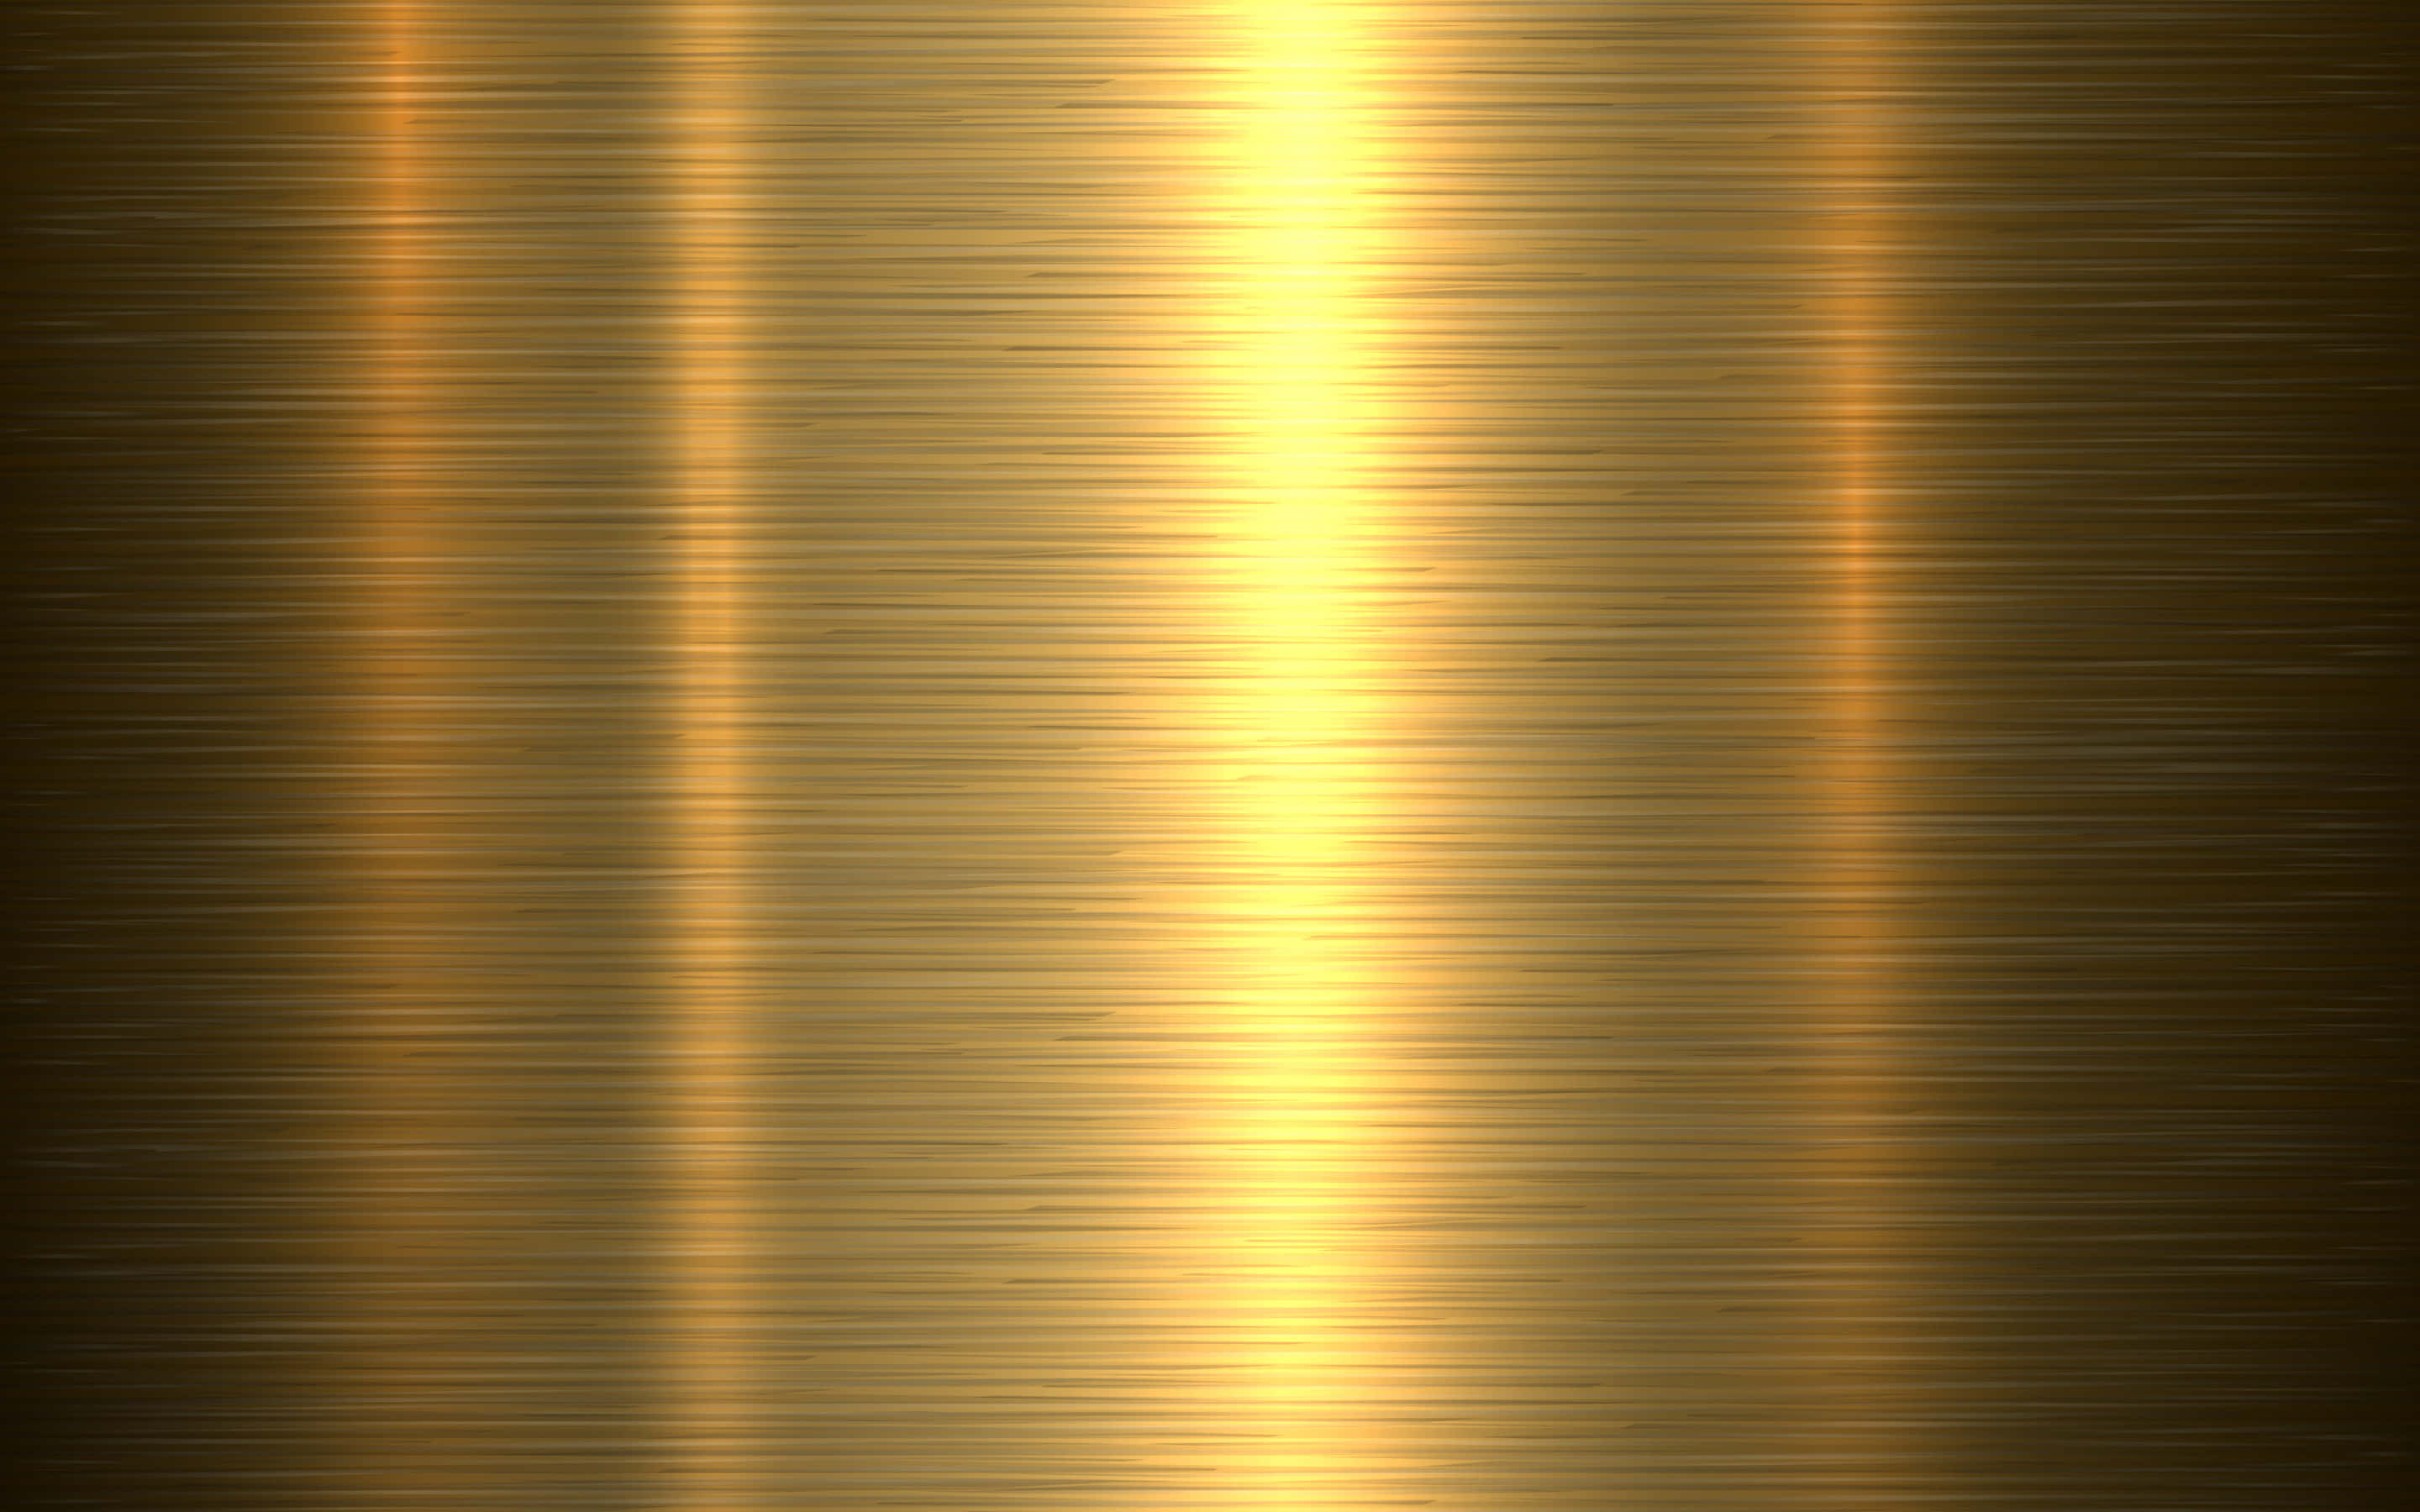 Precious Gold Against Glowing Shimmering Background